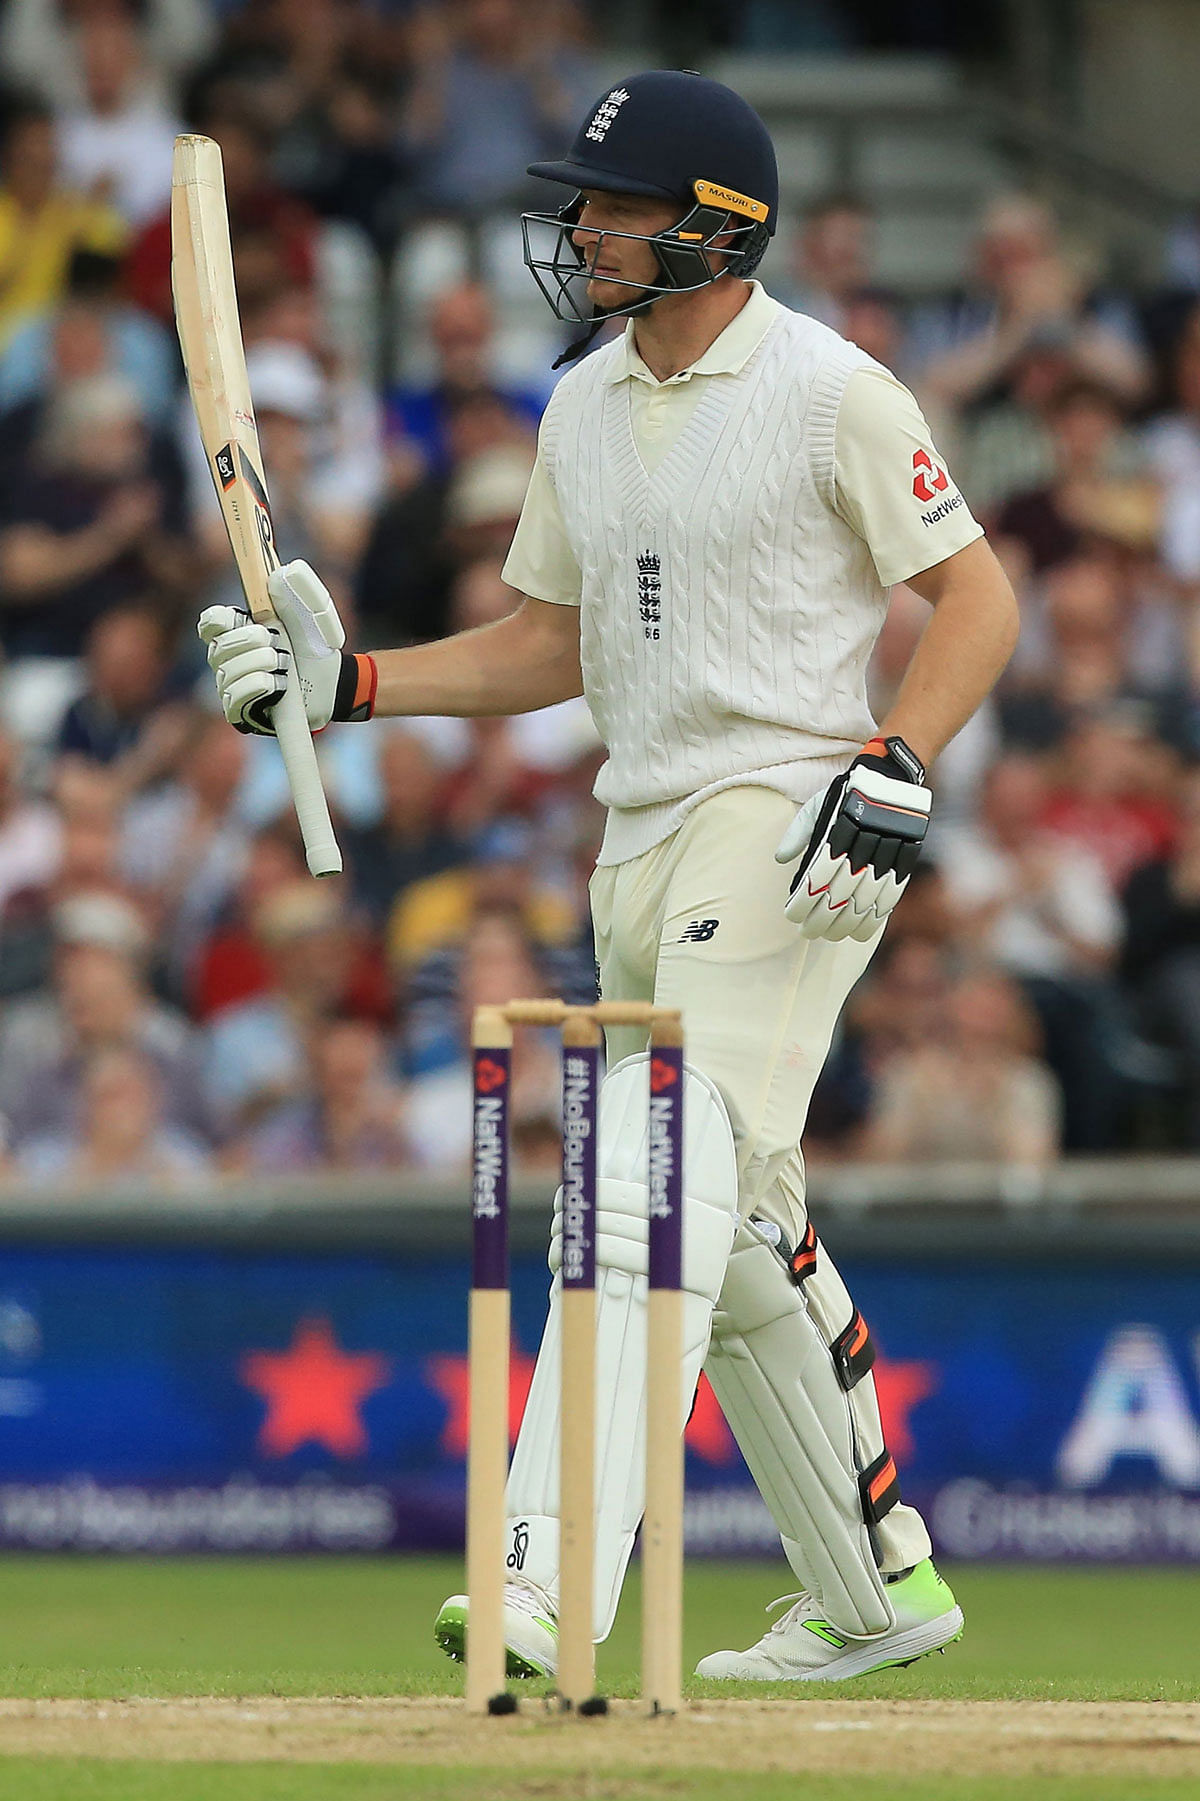 England`s Jos Buttler celebrates his half century on the third day of the second Test cricket match between England and Pakistan at Headingley cricket ground in Leeds, northern England on June 3, 2018. AFP